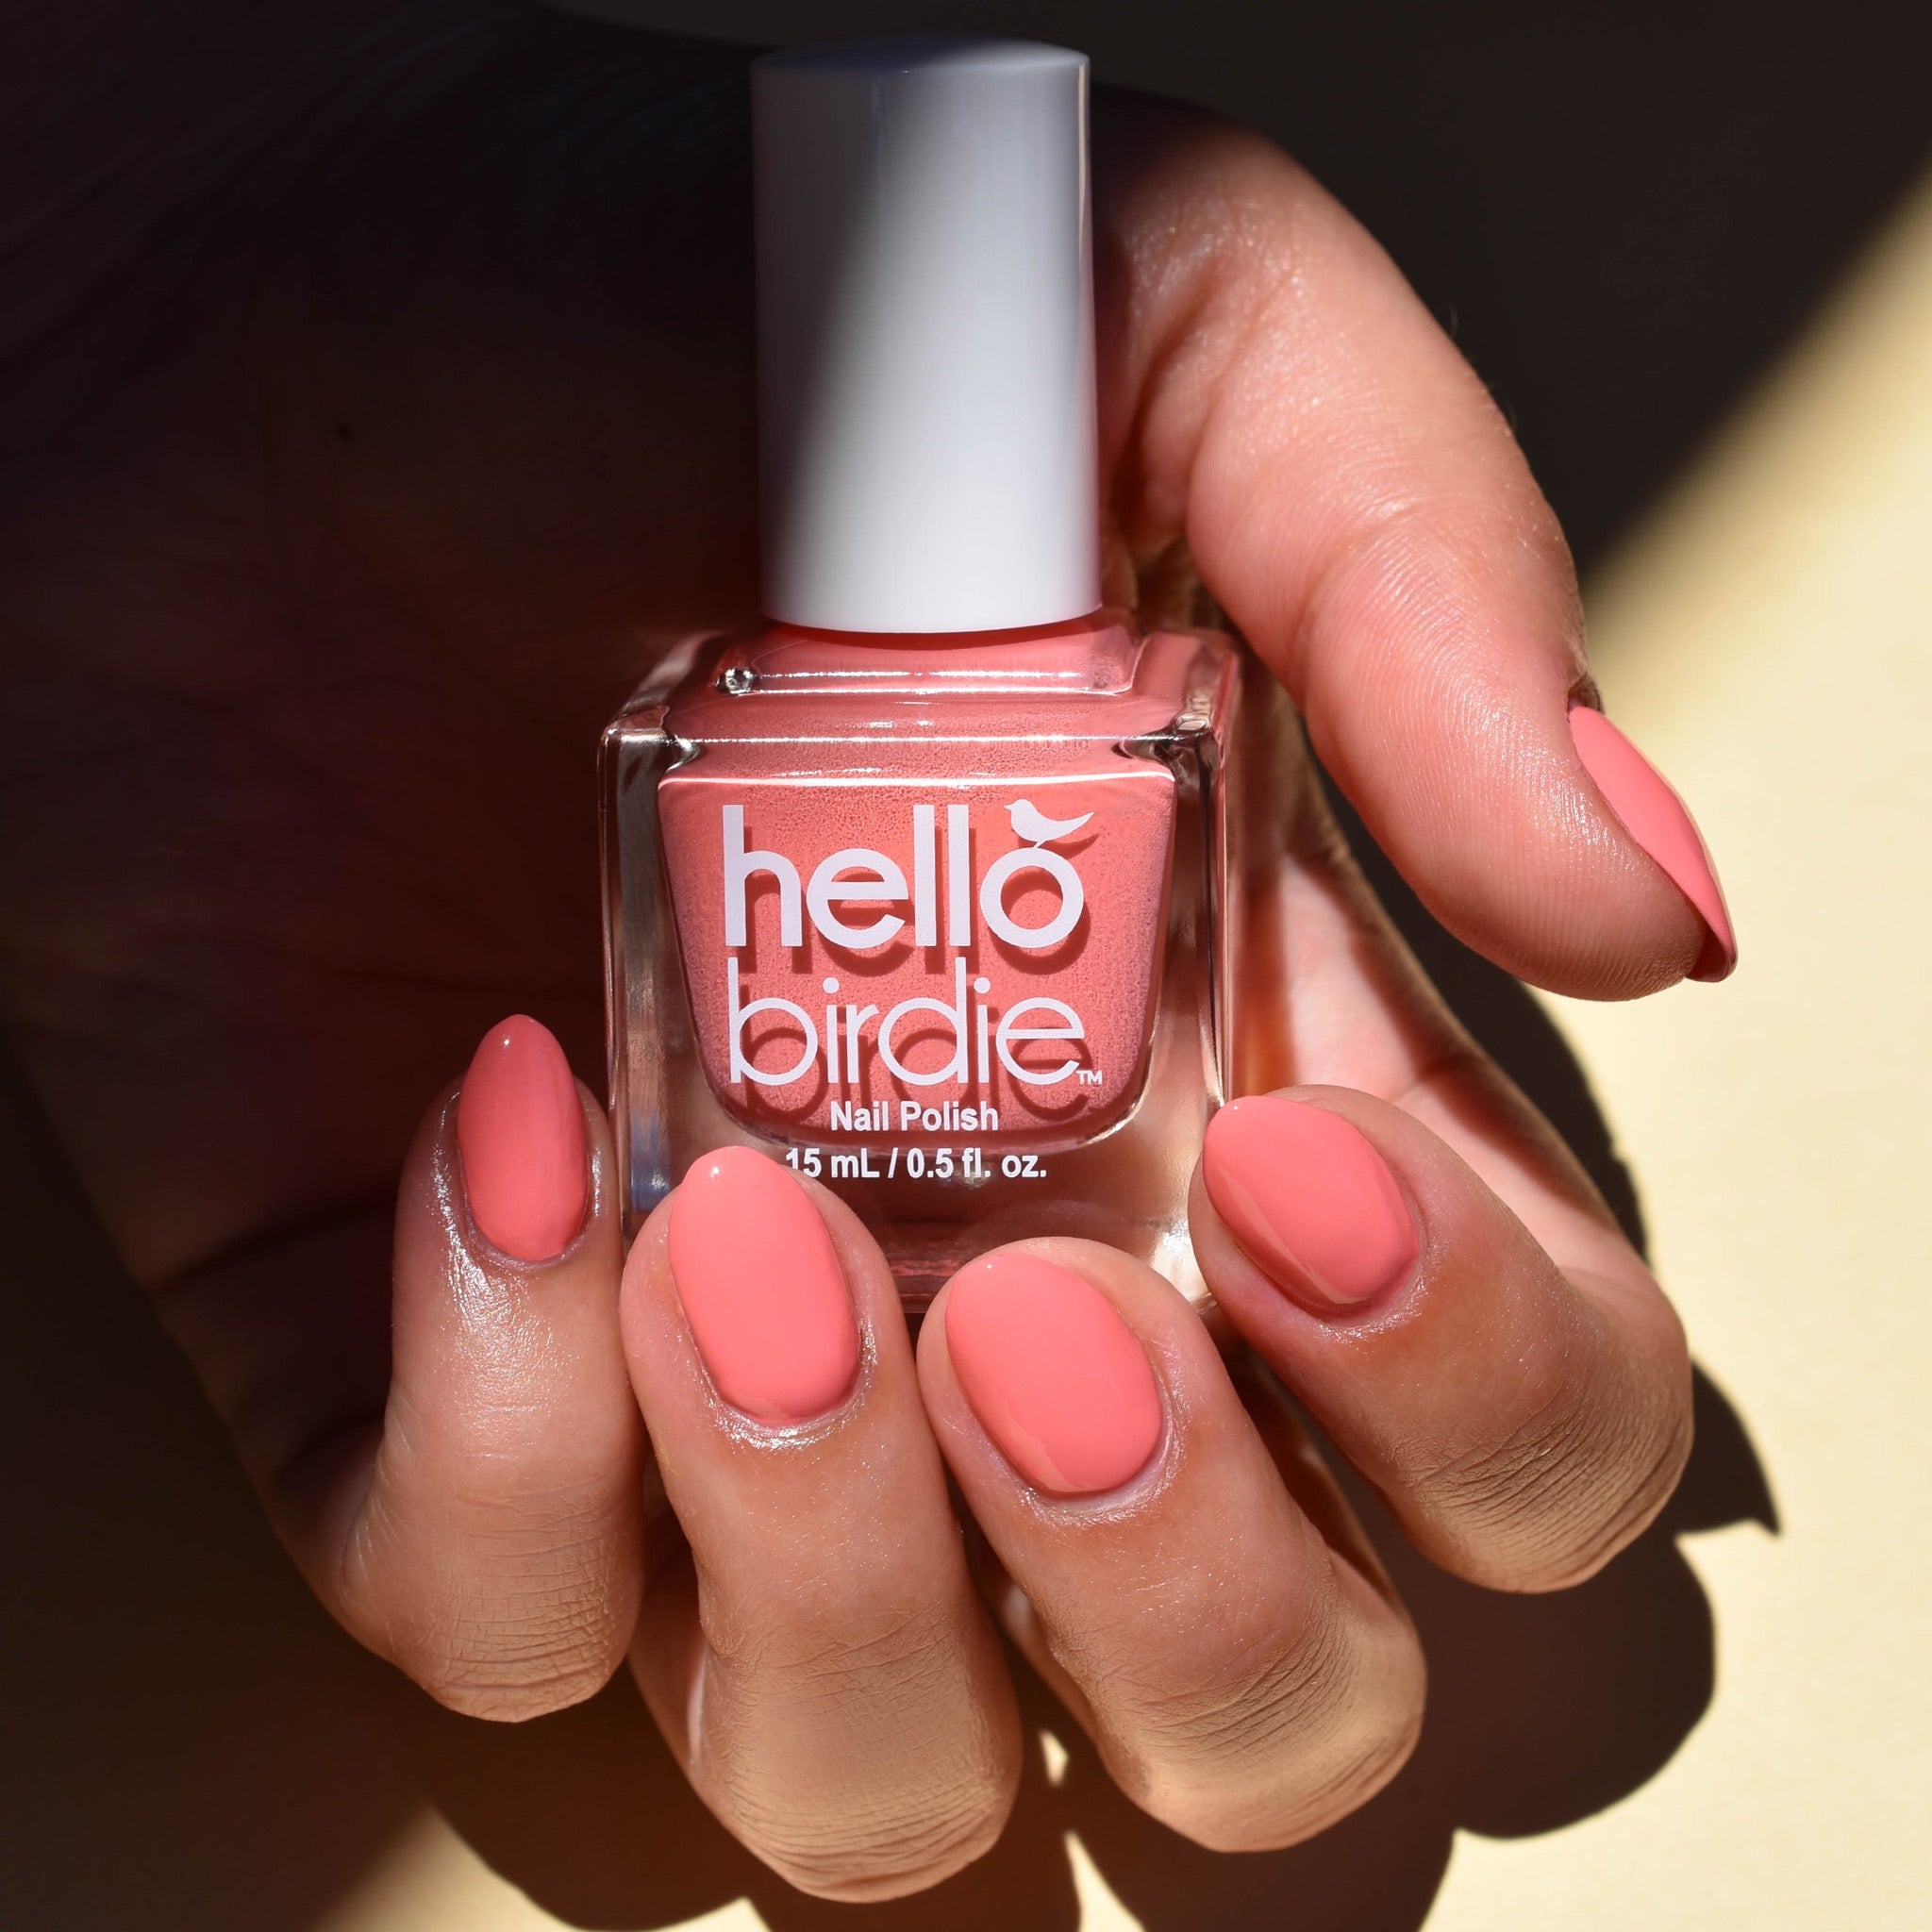 A close up of a mid toned hand is holding a bottle of Cupid Sparrow nail polish from Hello Birdie which is a deep blush hue. The bottle is cube shaped and has a white cap and text. The nails are painting with the same polish. A beam of light illuminates the bottle and hand and the background is a cream color.